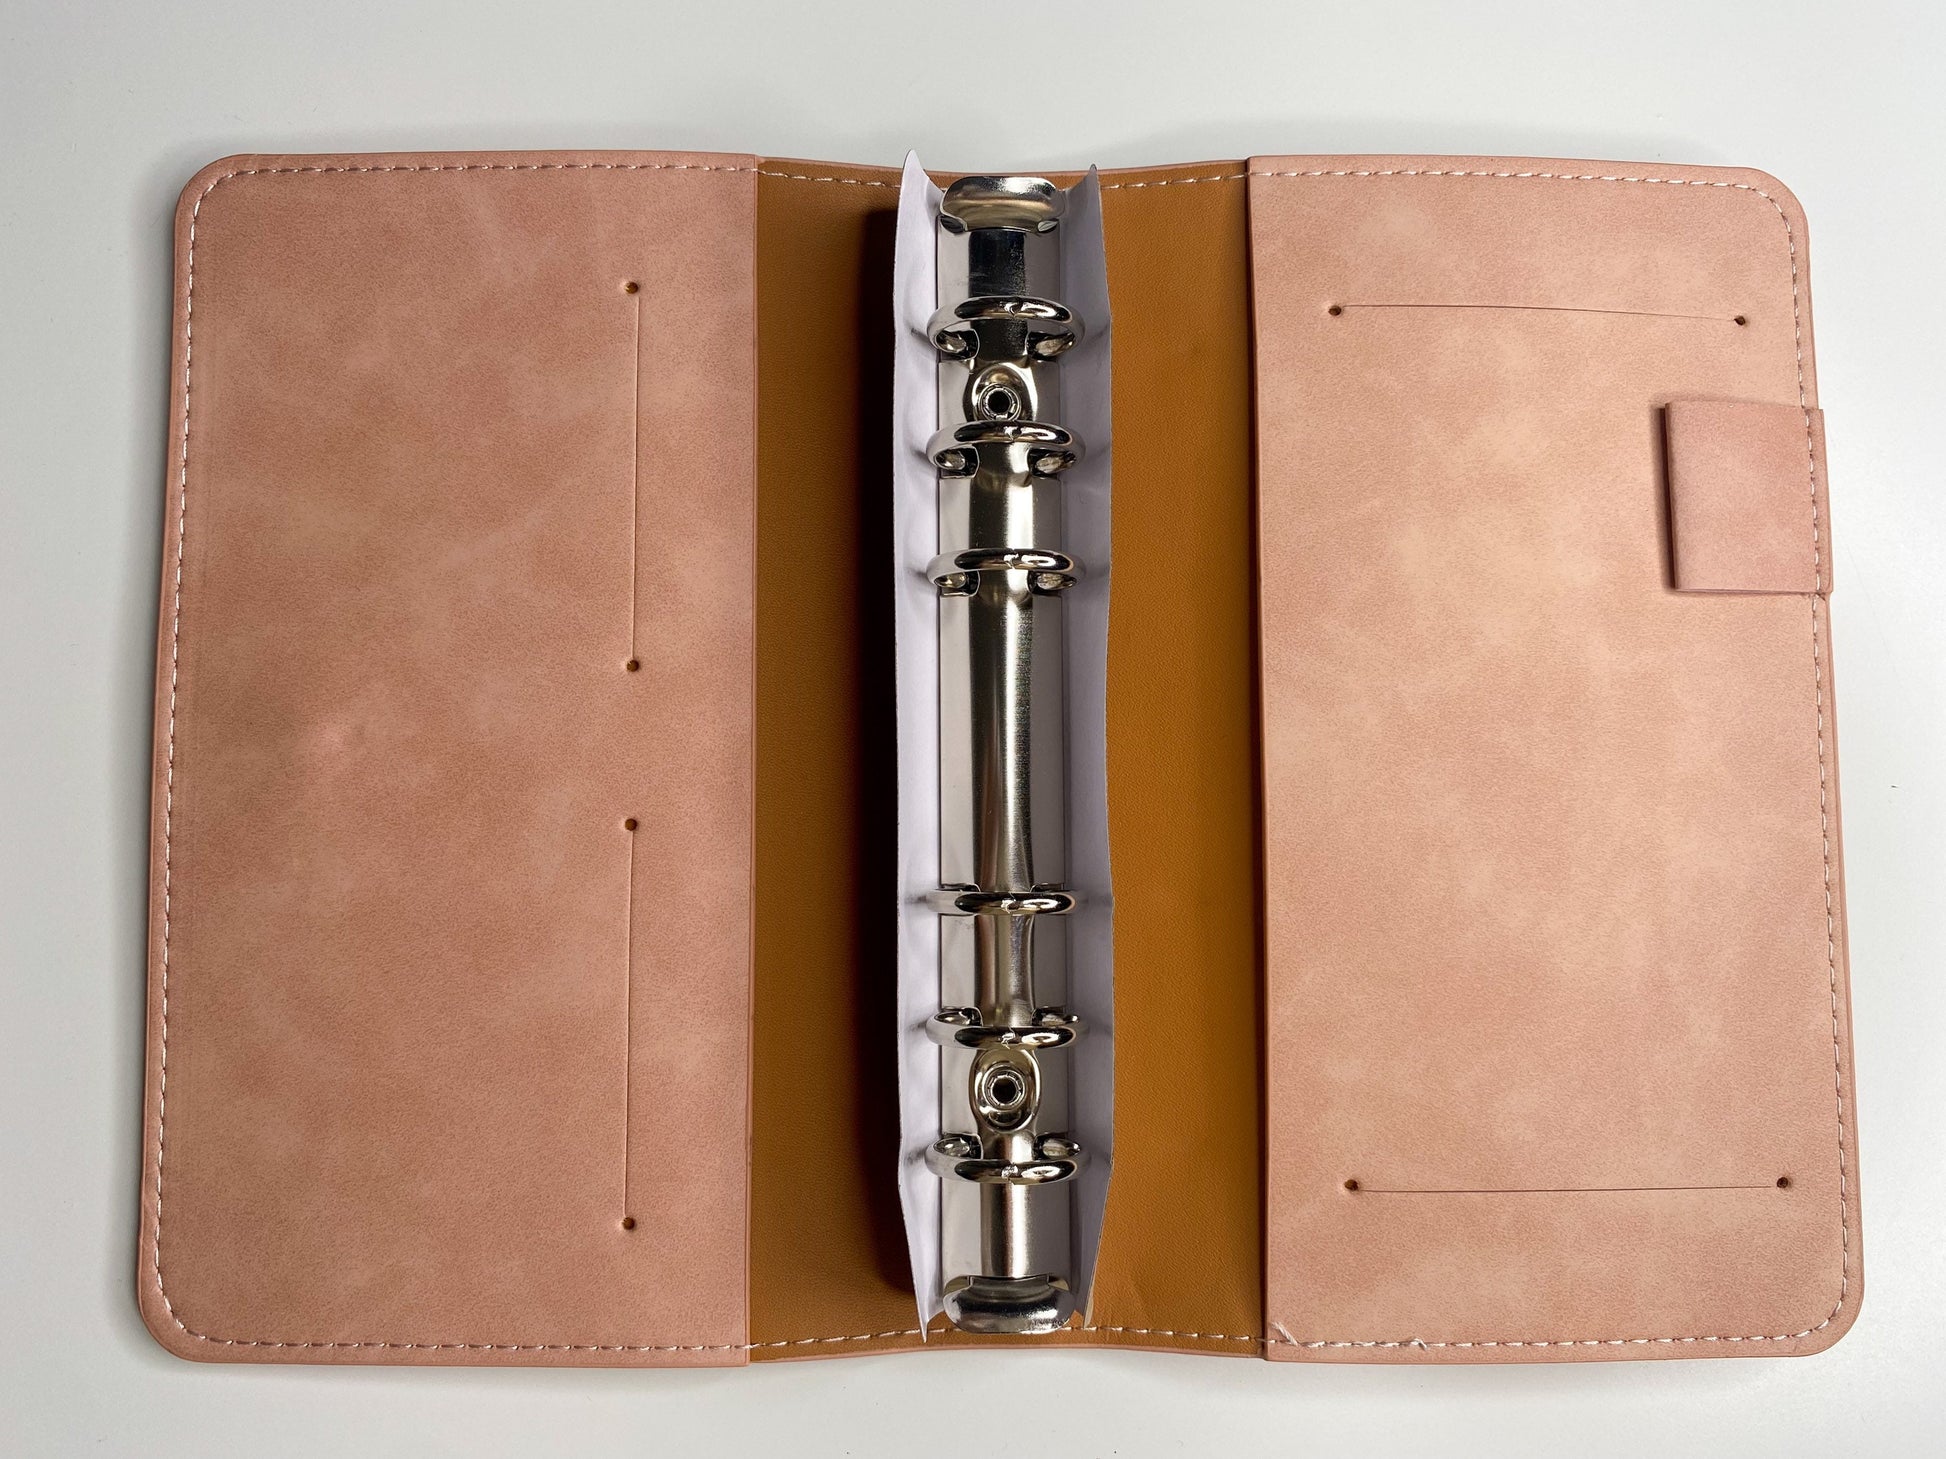 LV Inspired A6 Sized Cash Envelope Binders ONLY – Shes On A Budget